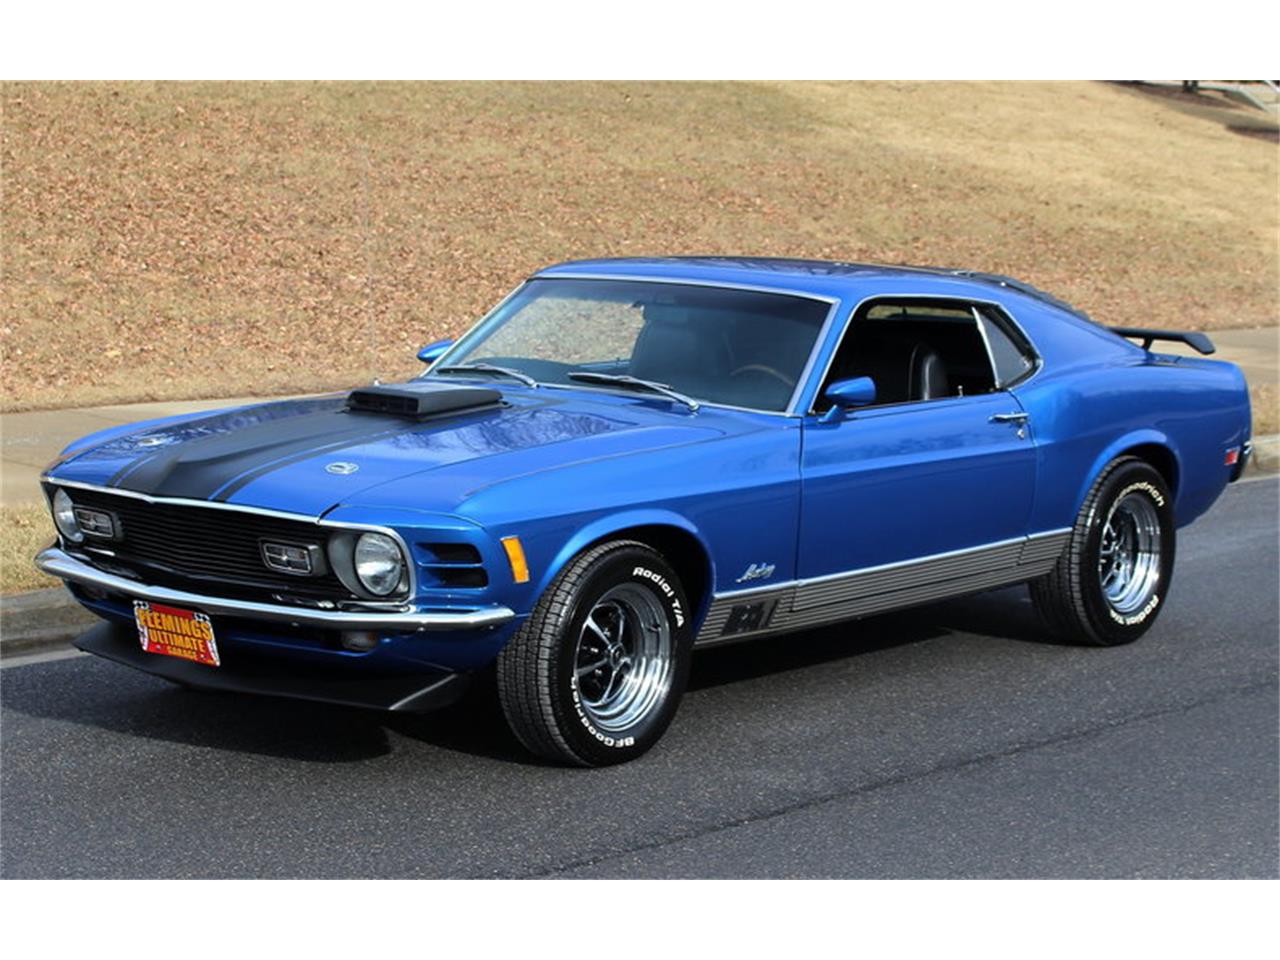 1970 Ford Mustang Mach 1 for Sale | ClassicCars.com | CC-1059472